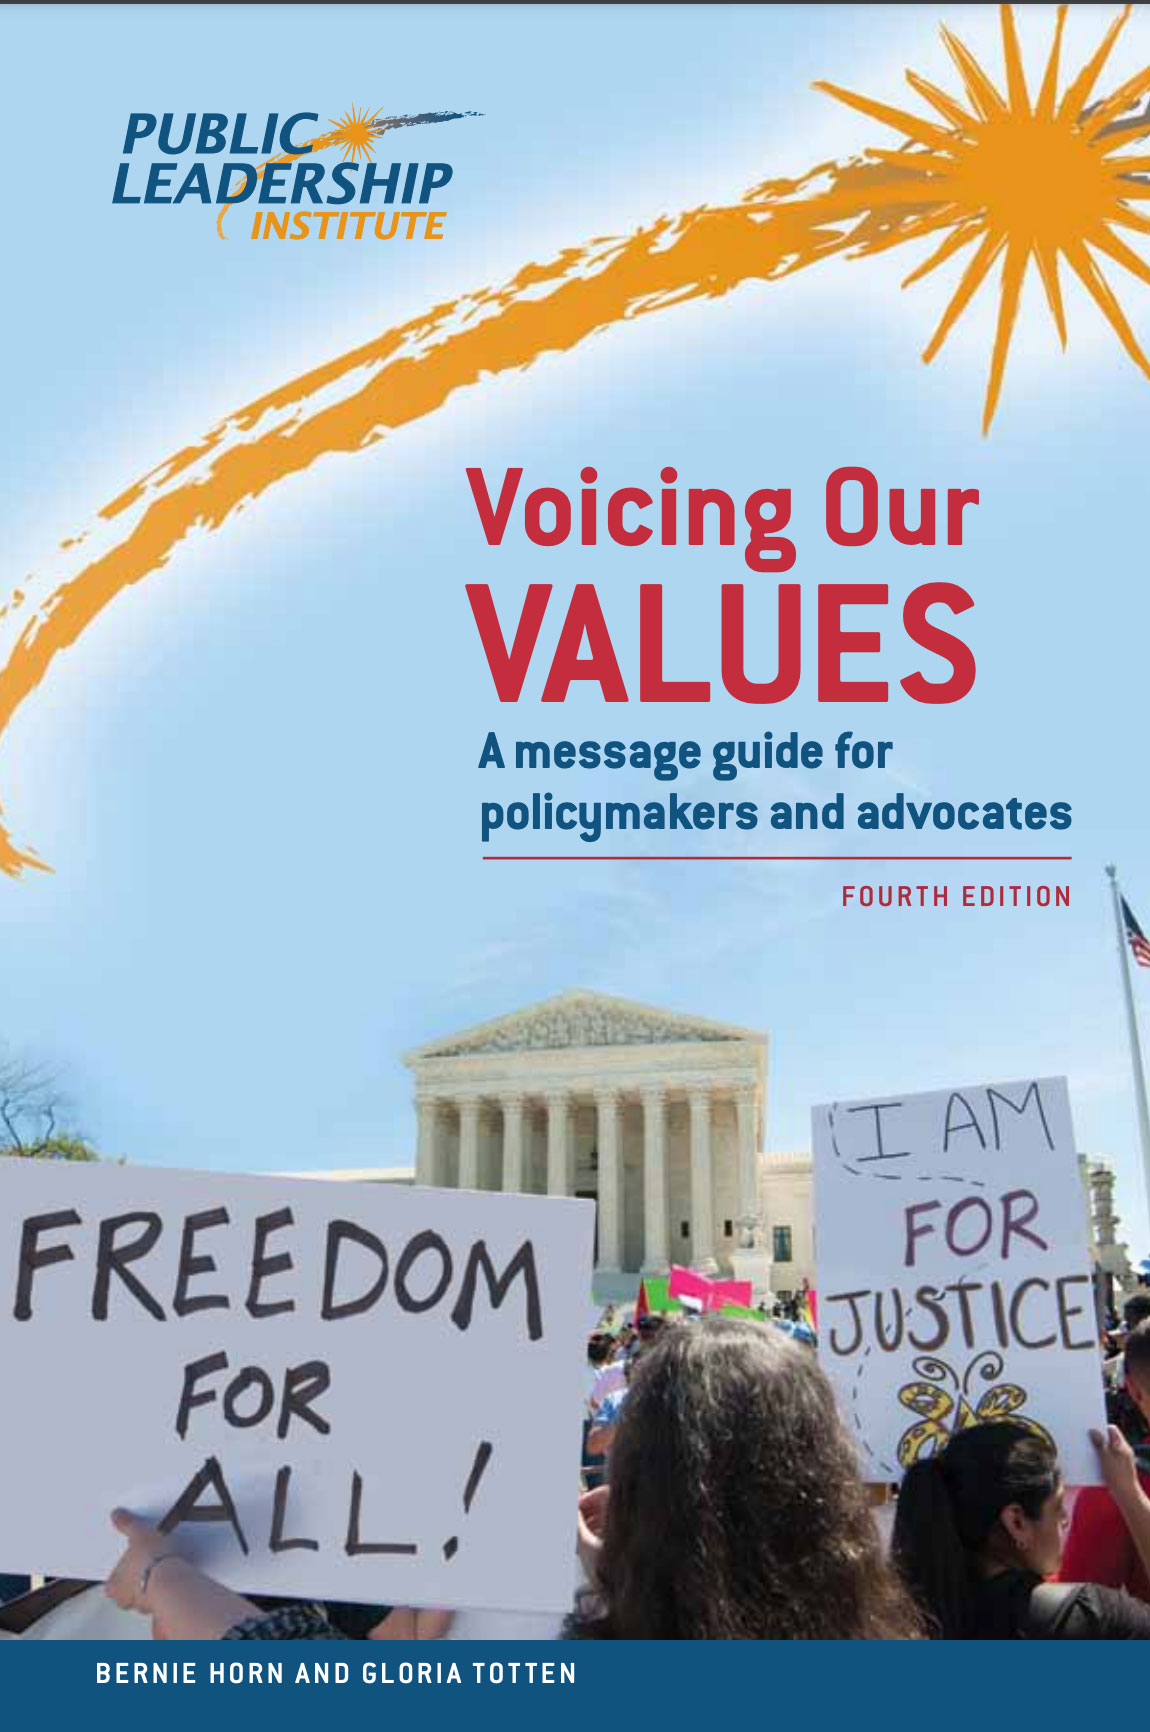 Cover of a book called Voicing Our Values withe protestors and signs in front of a government building.